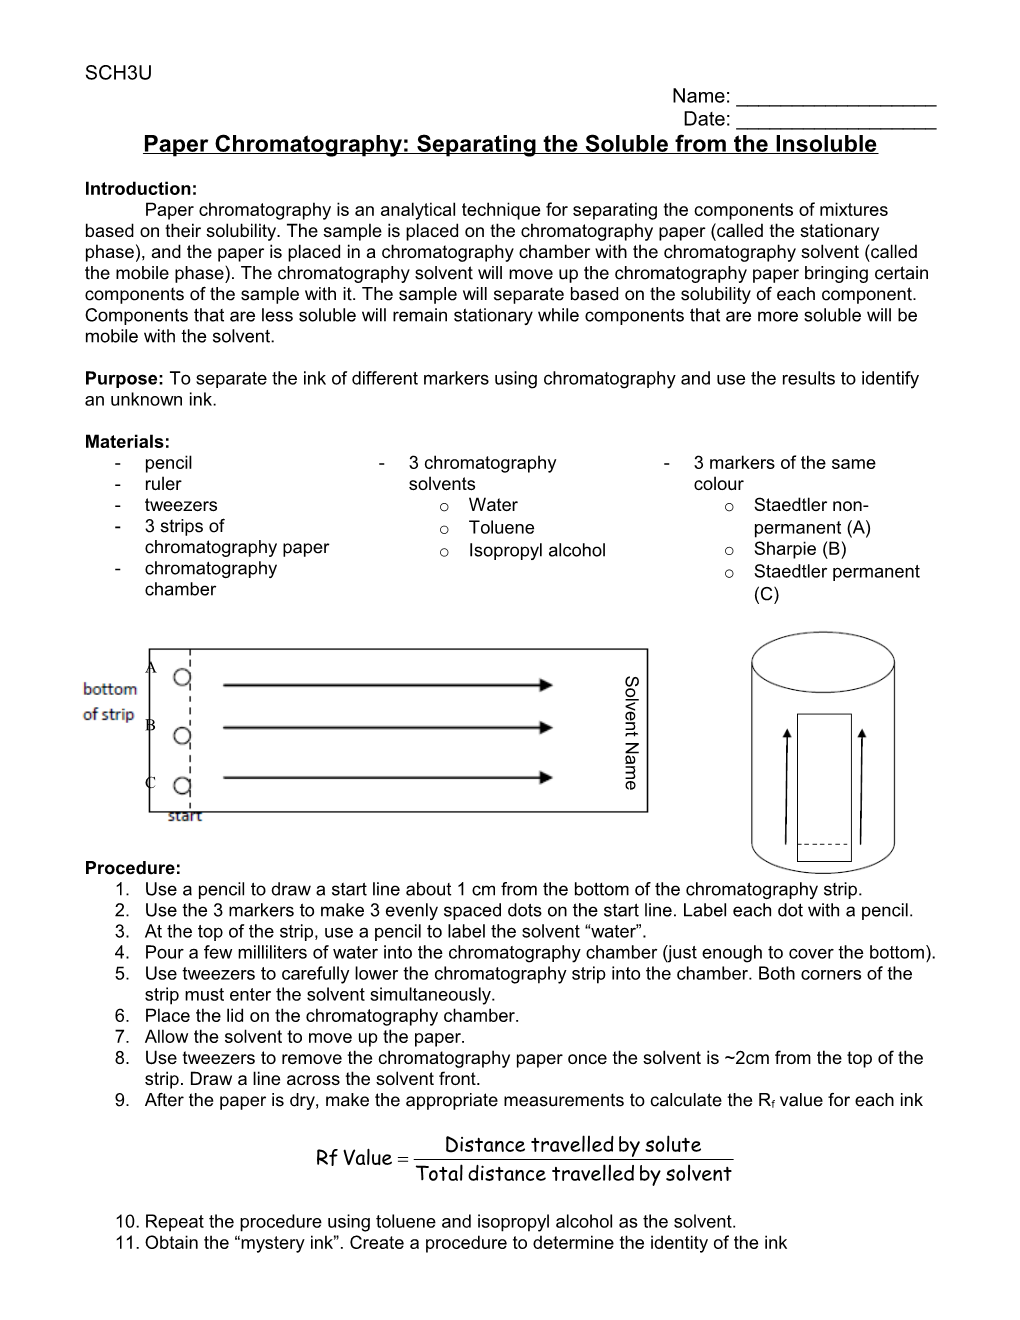 Paper Chromatography: Separating the Soluble from the Insoluble